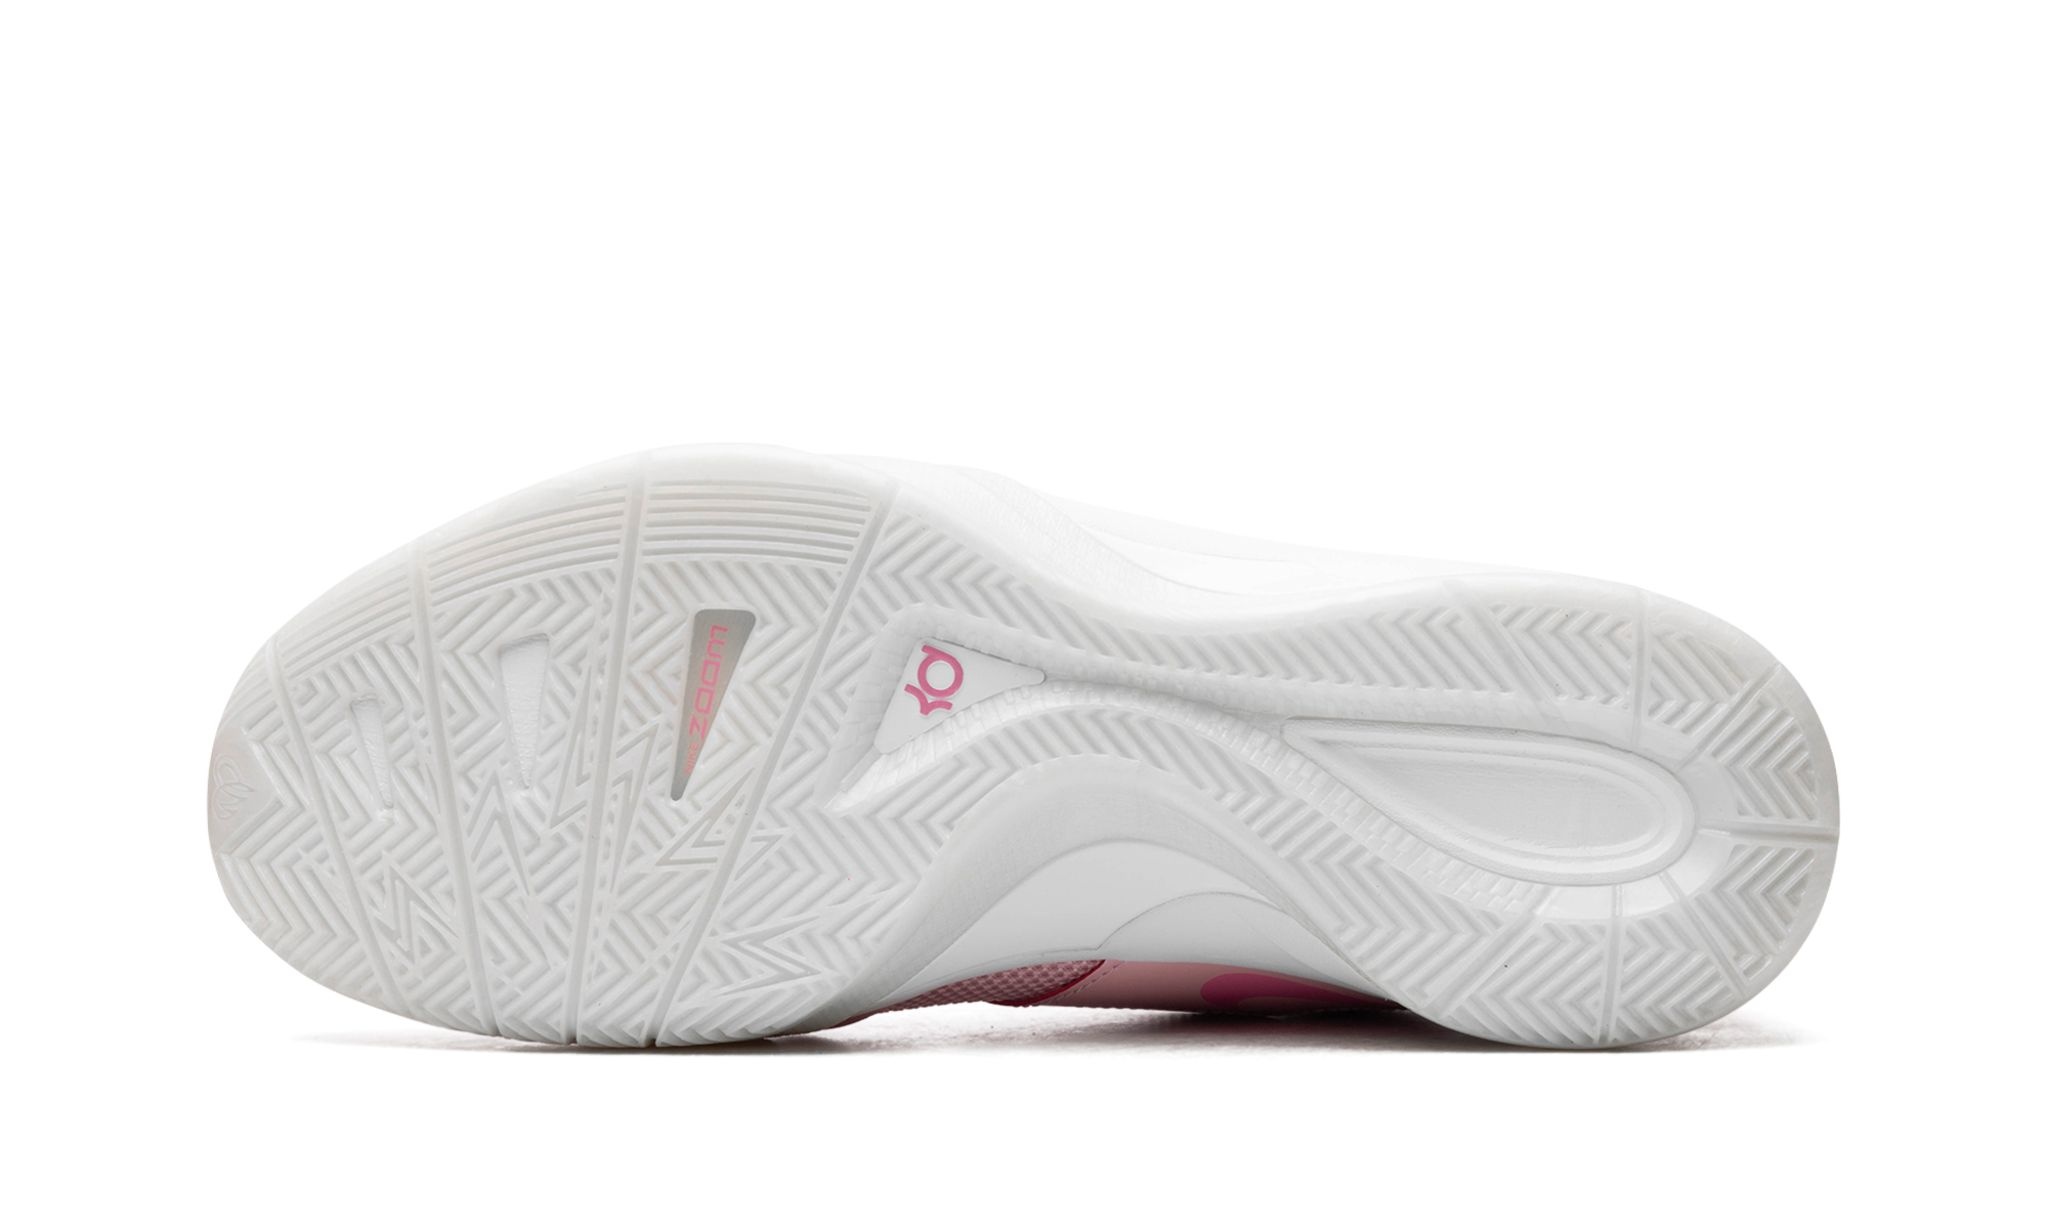 KD 3 "Aunt Pearl" - 5